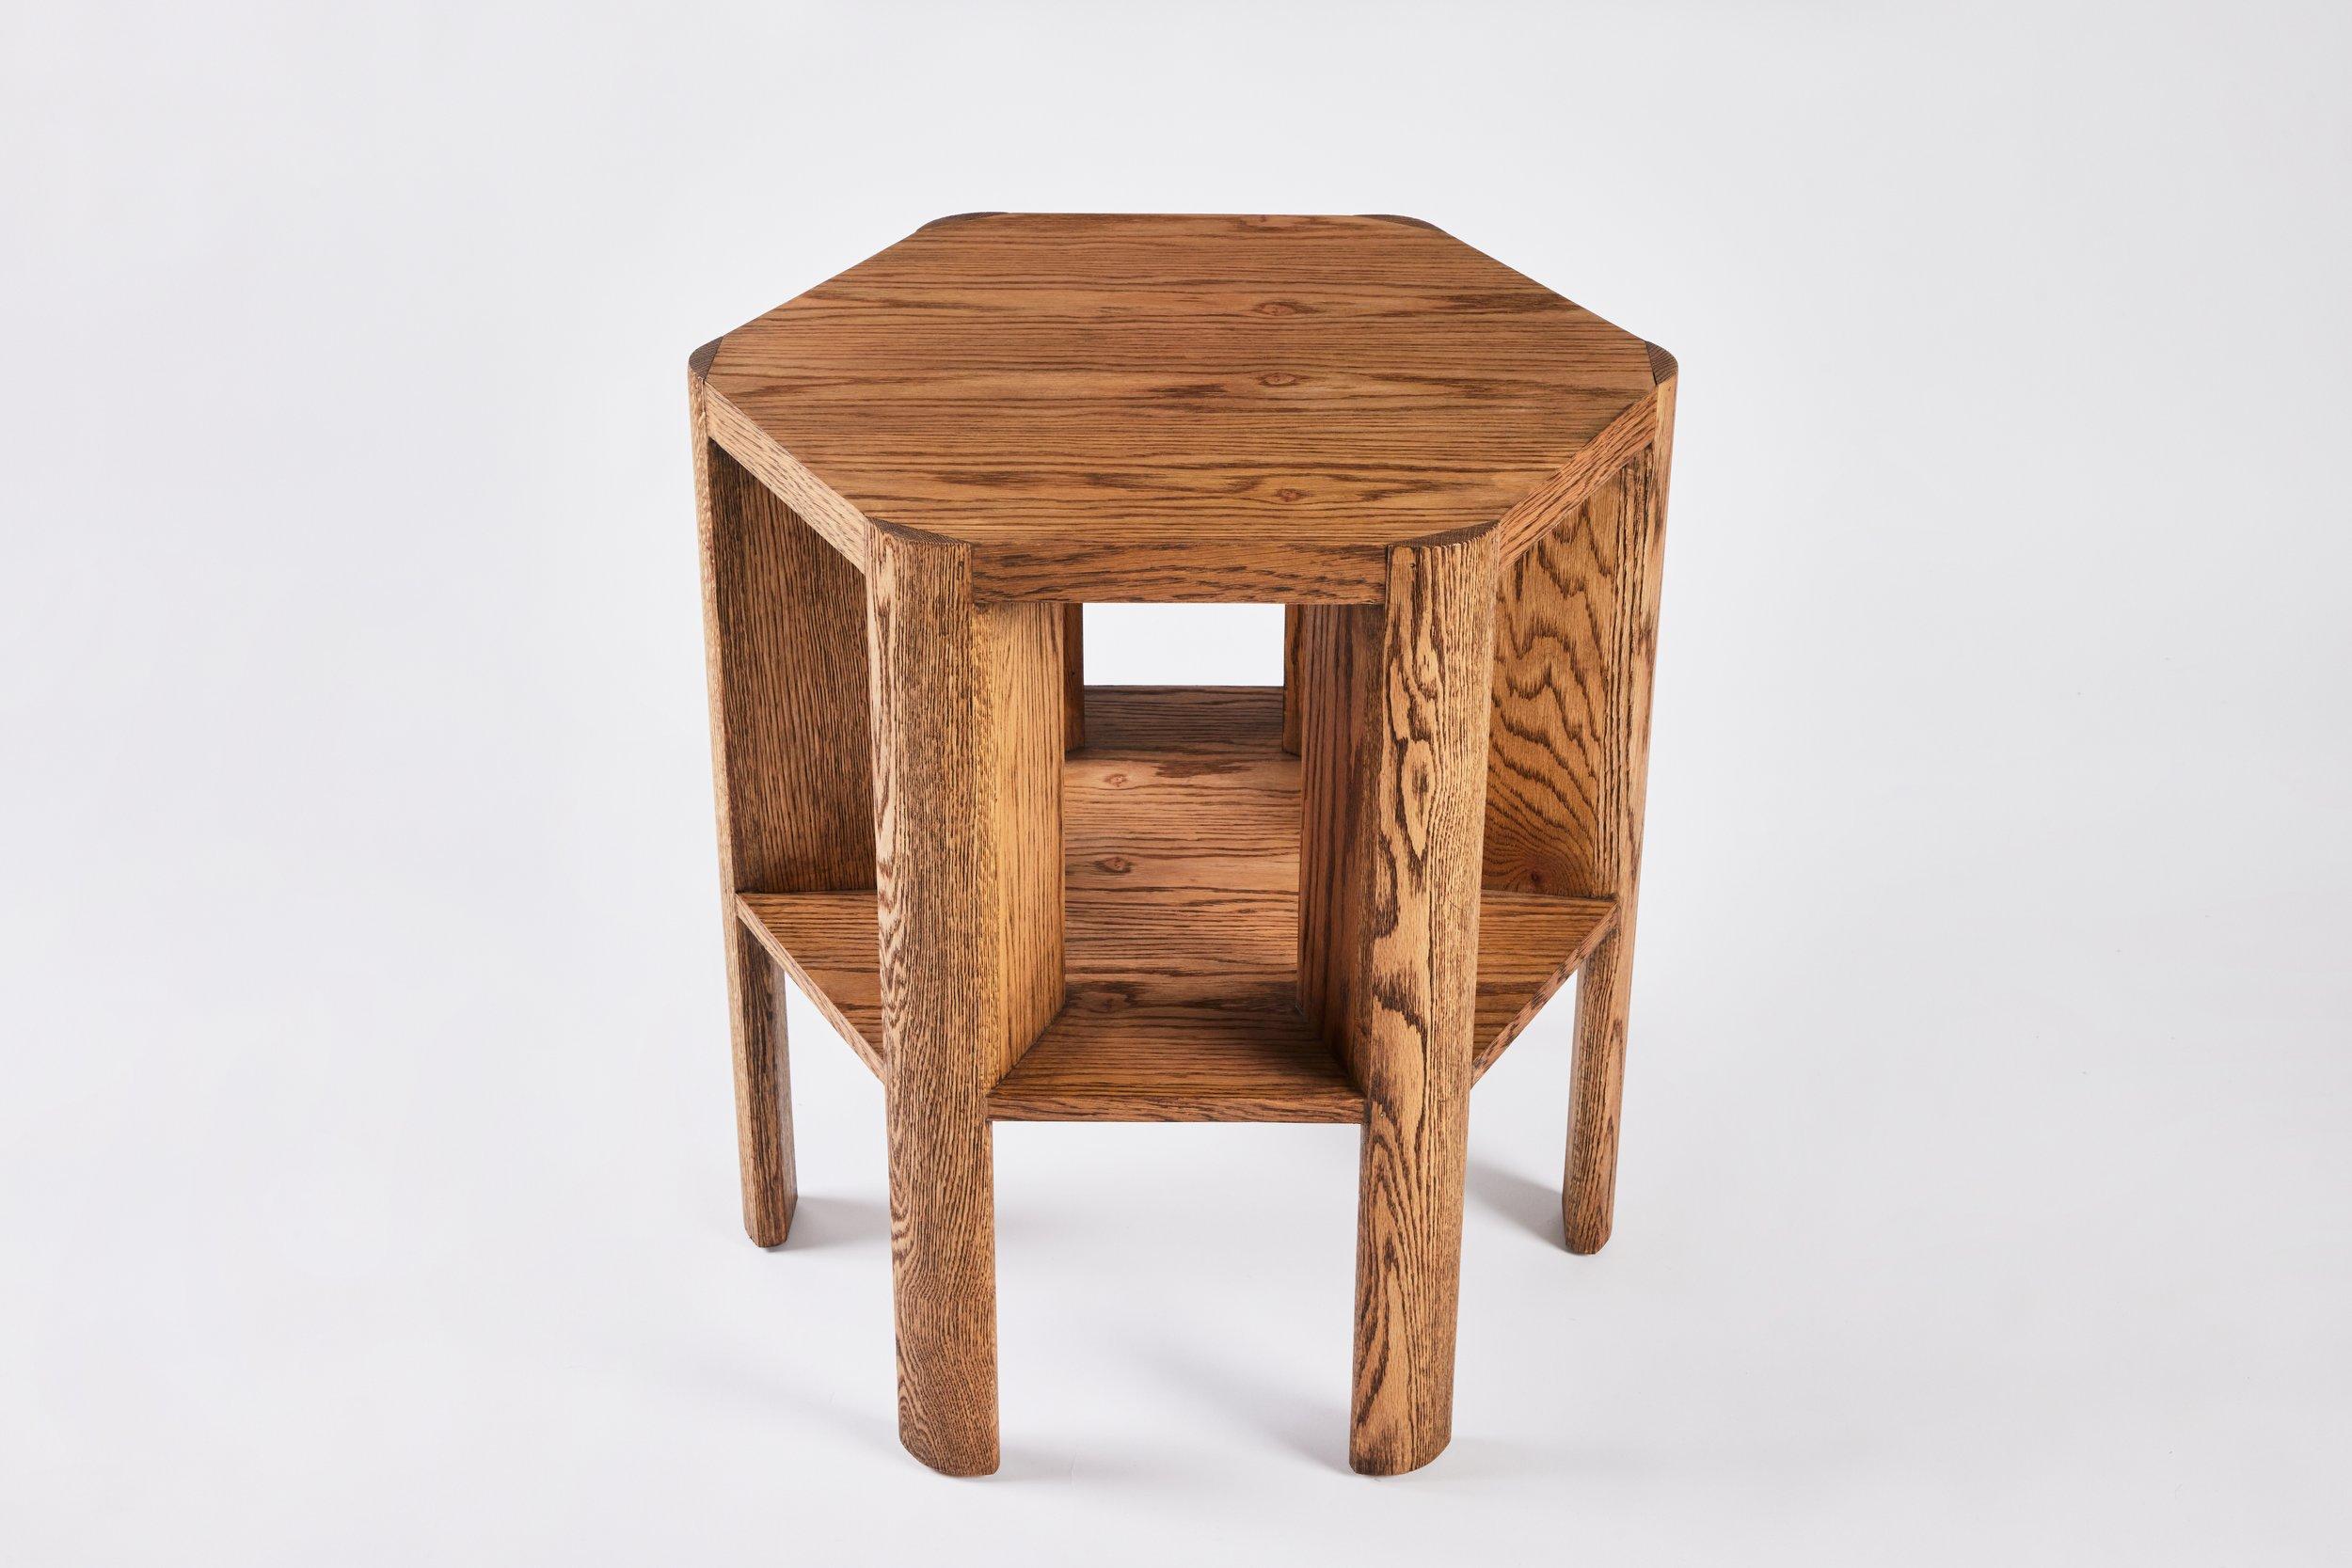 Wood Minimalist Small Modern Library Table in Tanned Oak Finish by Martin & Brockett For Sale